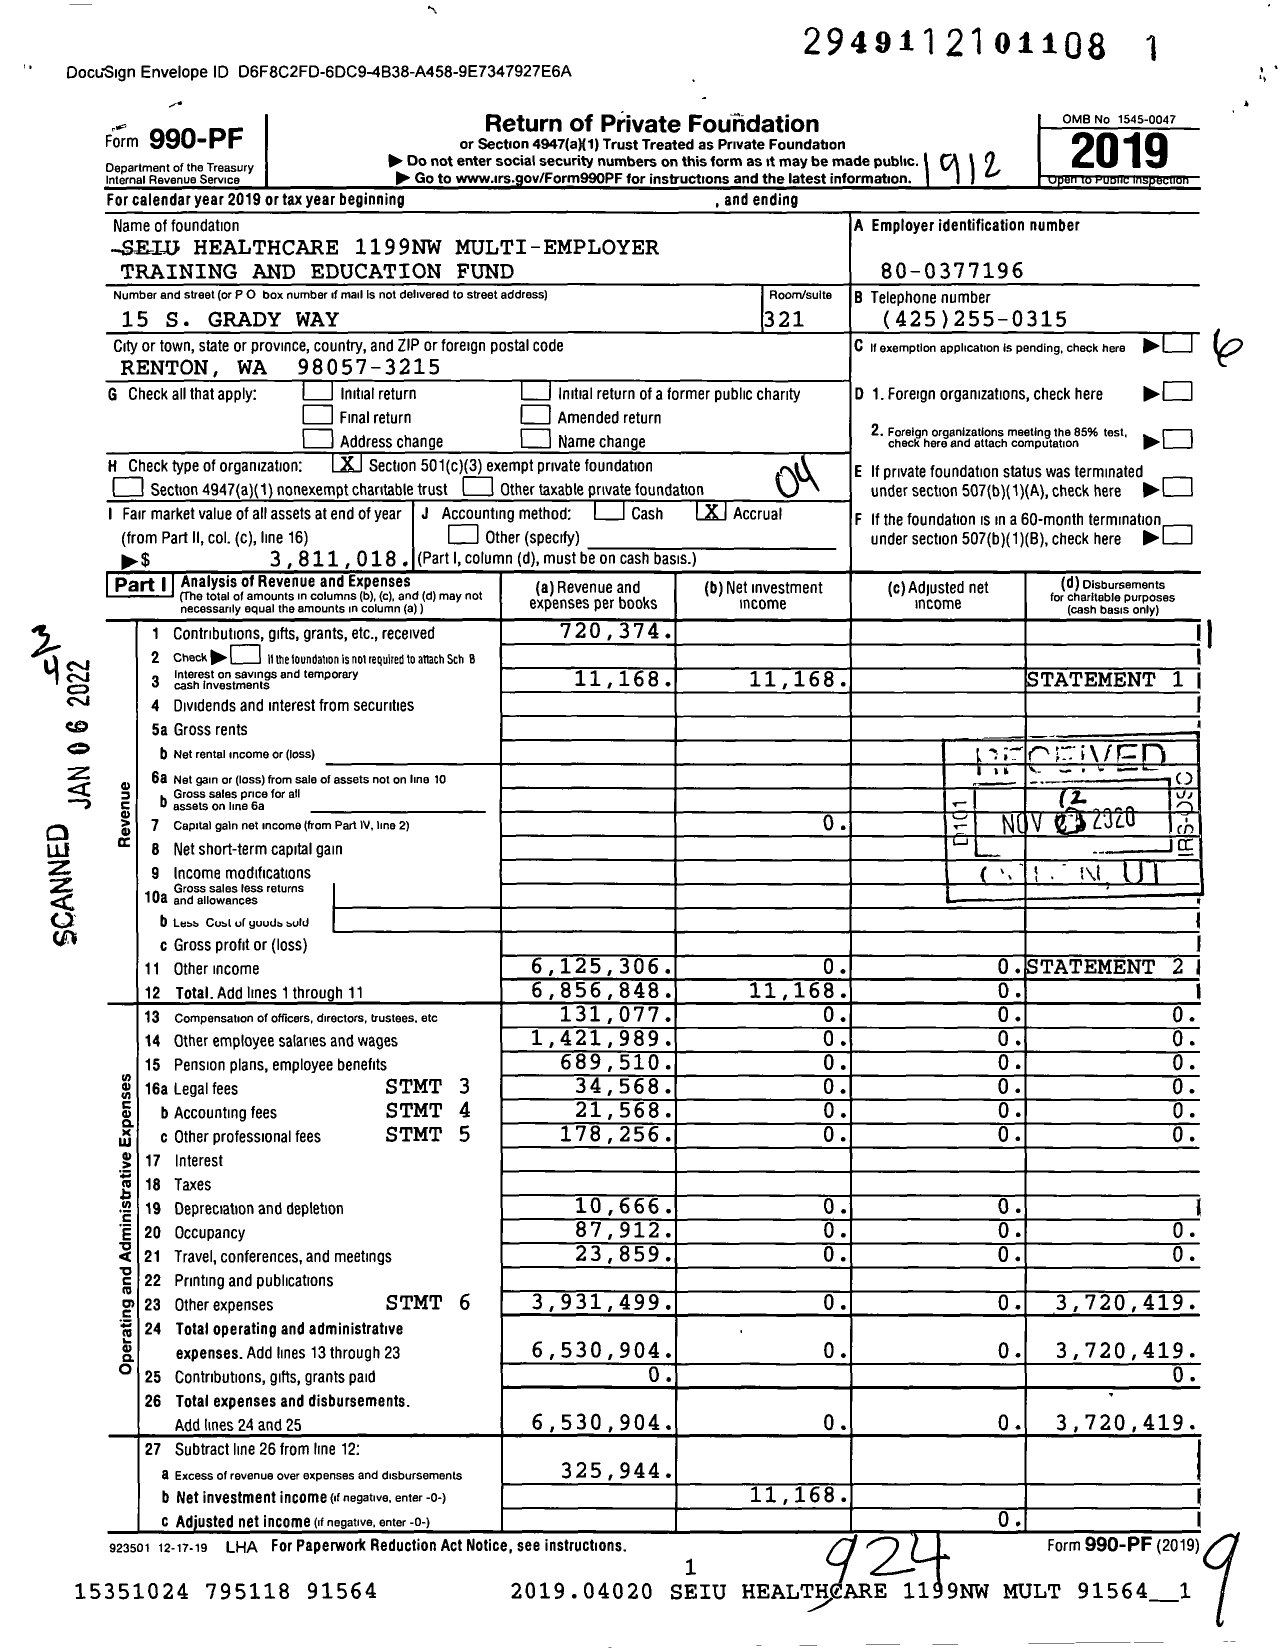 Image of first page of 2019 Form 990PF for Seiu Healthcare 1199nw Multi-Employer Training and Education Fund